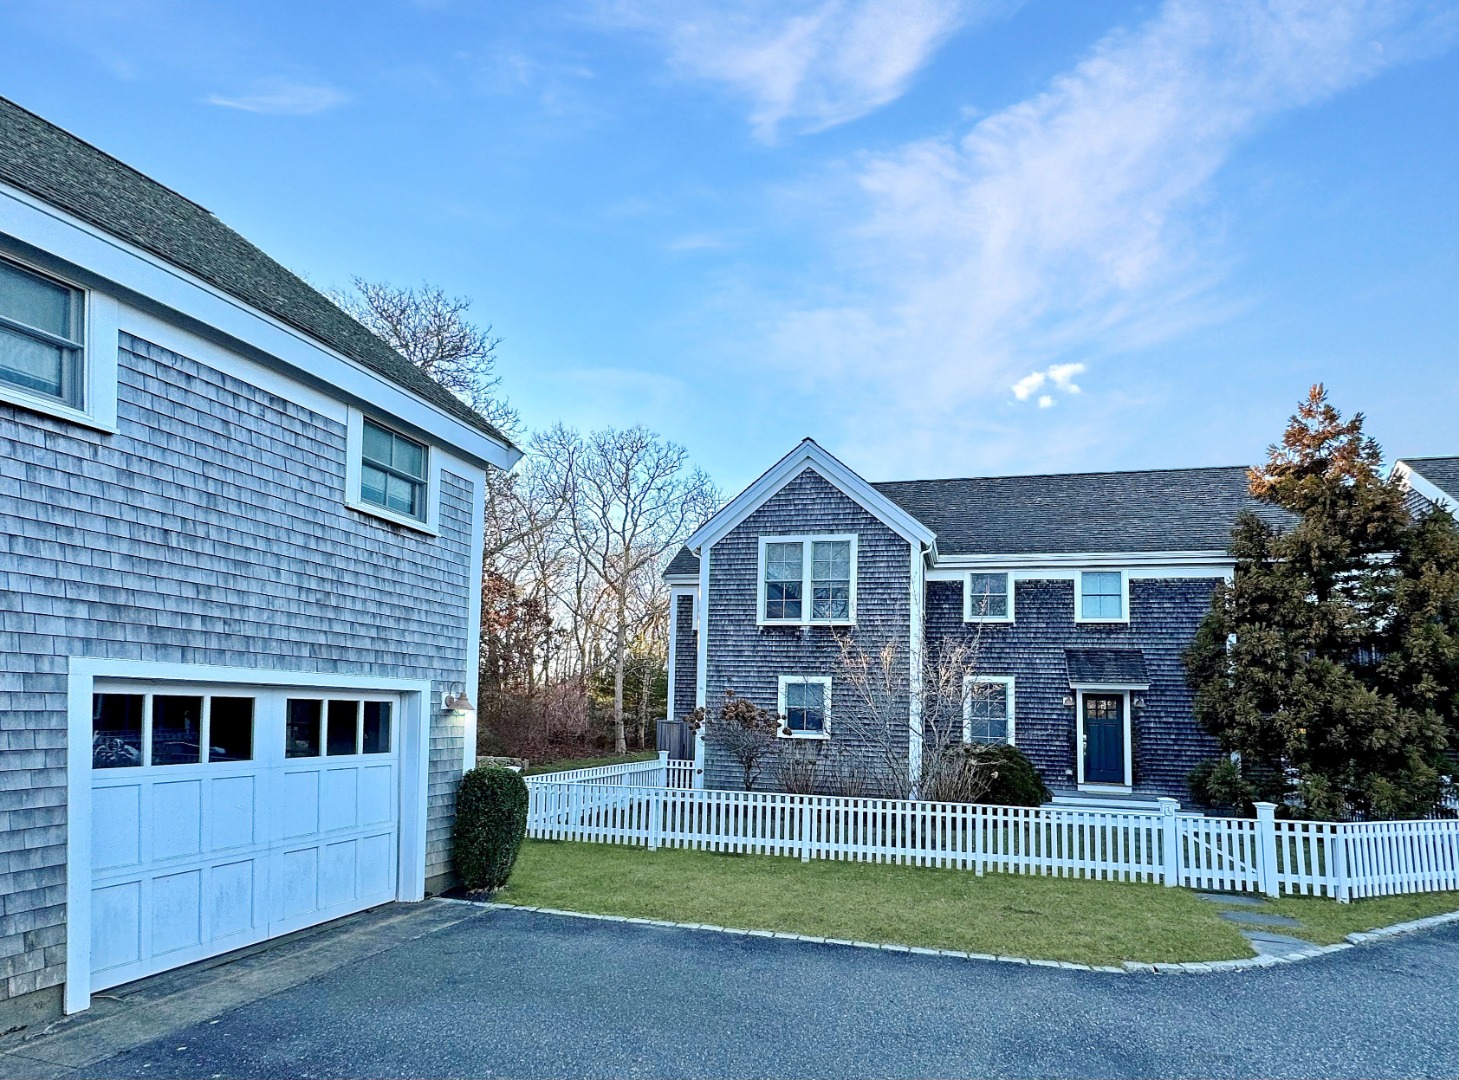 Welcome to 3A Magnolia Way at Fairway Village in Edgartown.